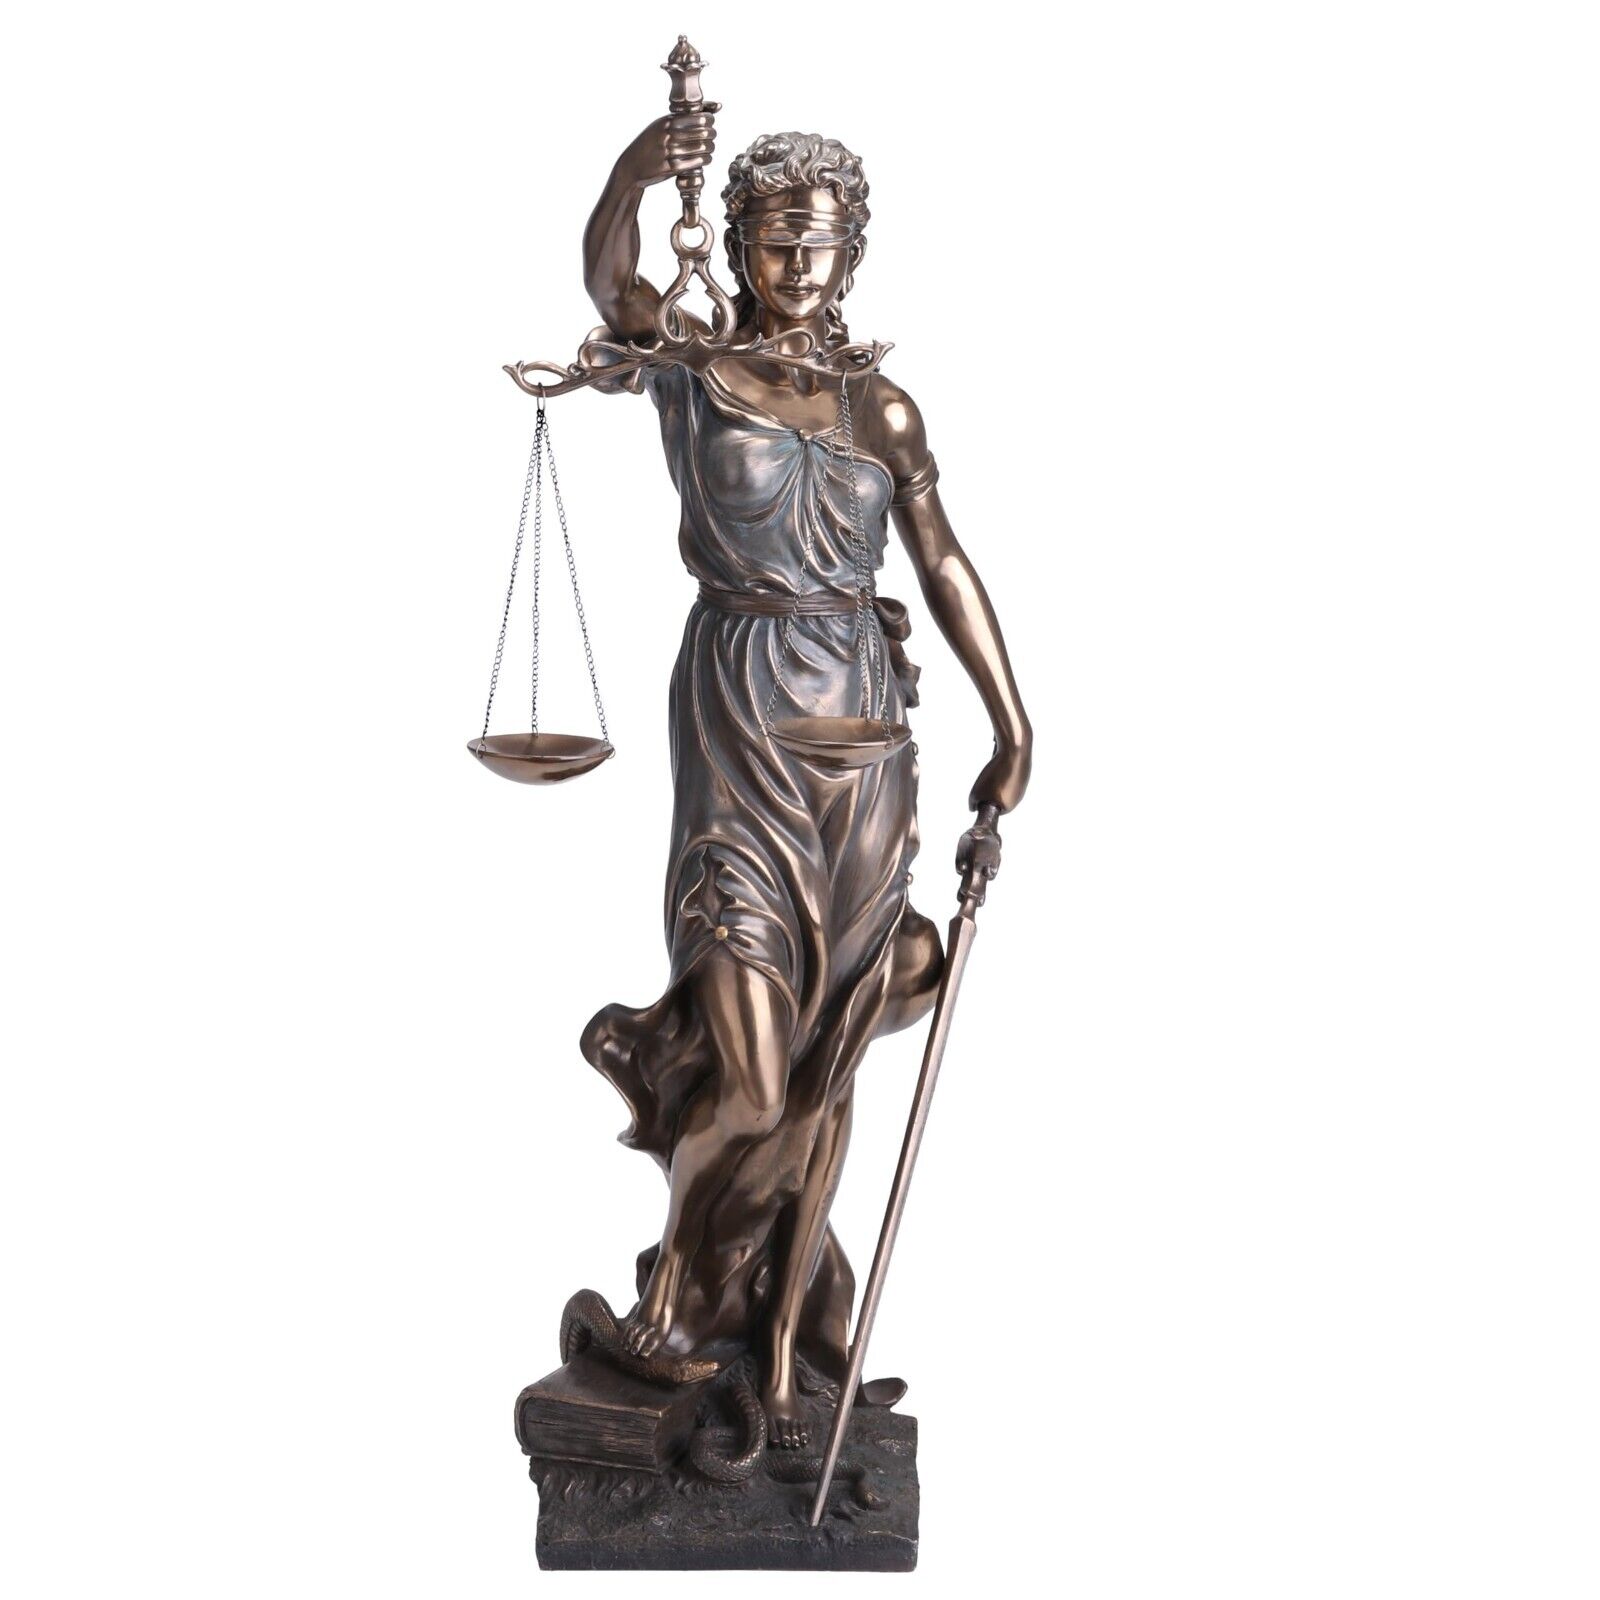 Decorative Blind Lady Justice Themis Goddess Statue Gift